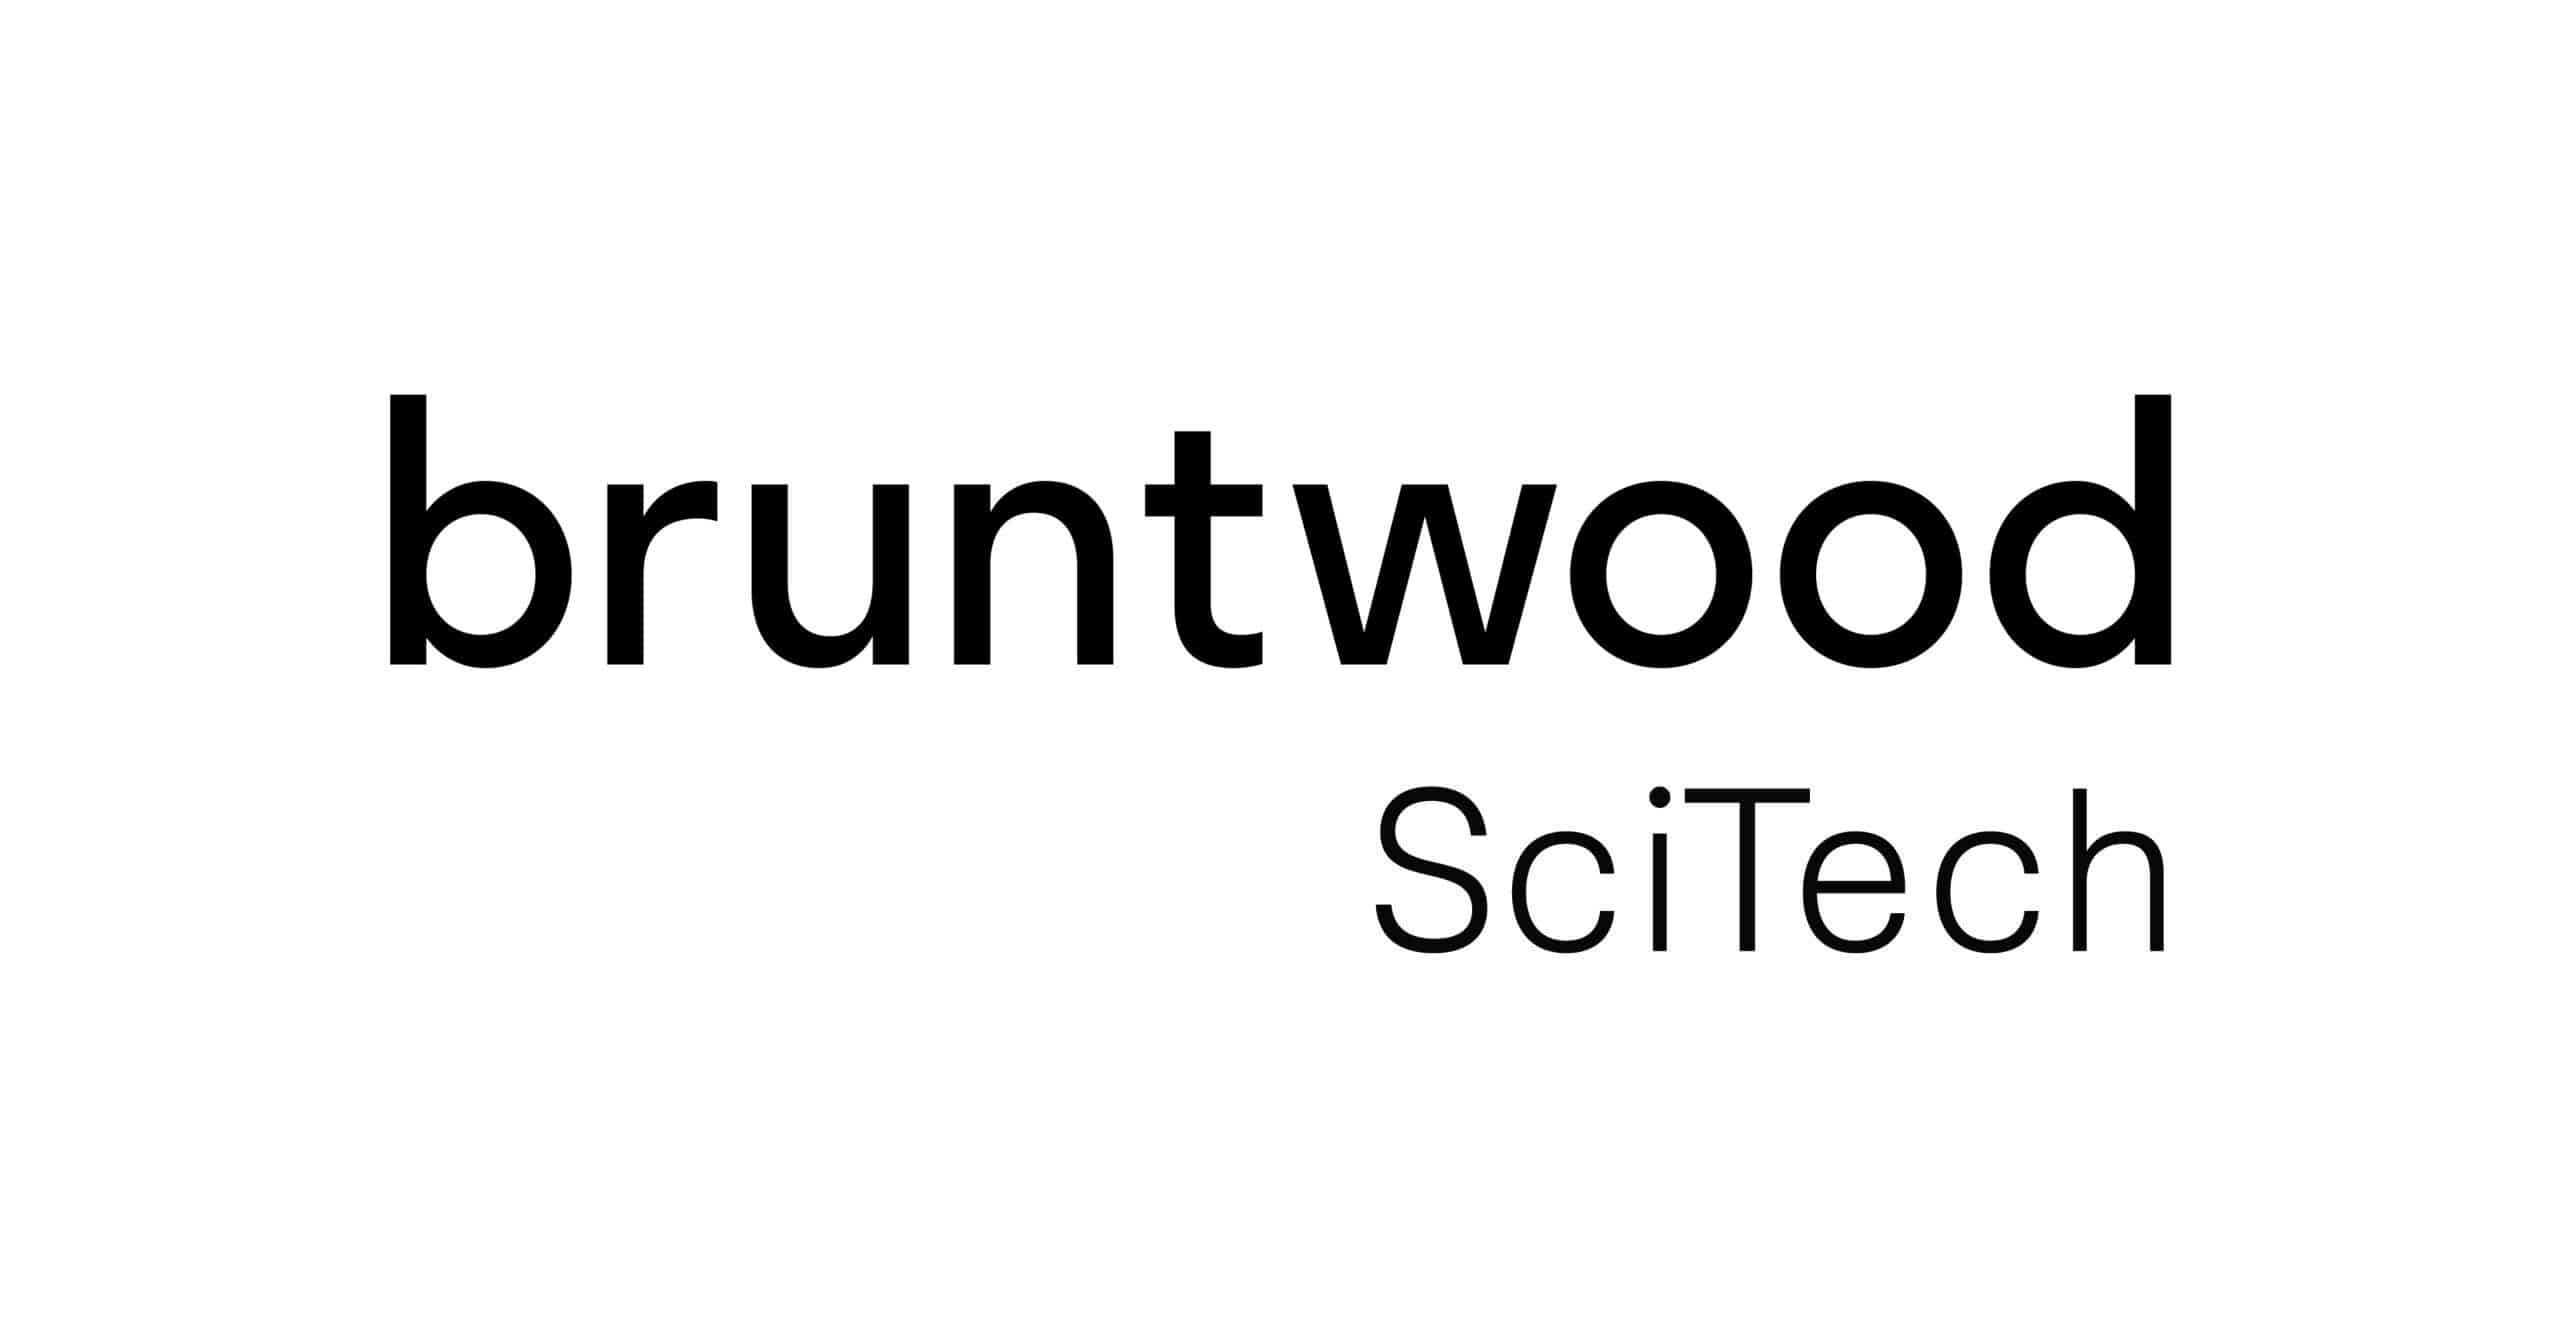 Bruntwood Sci Tech